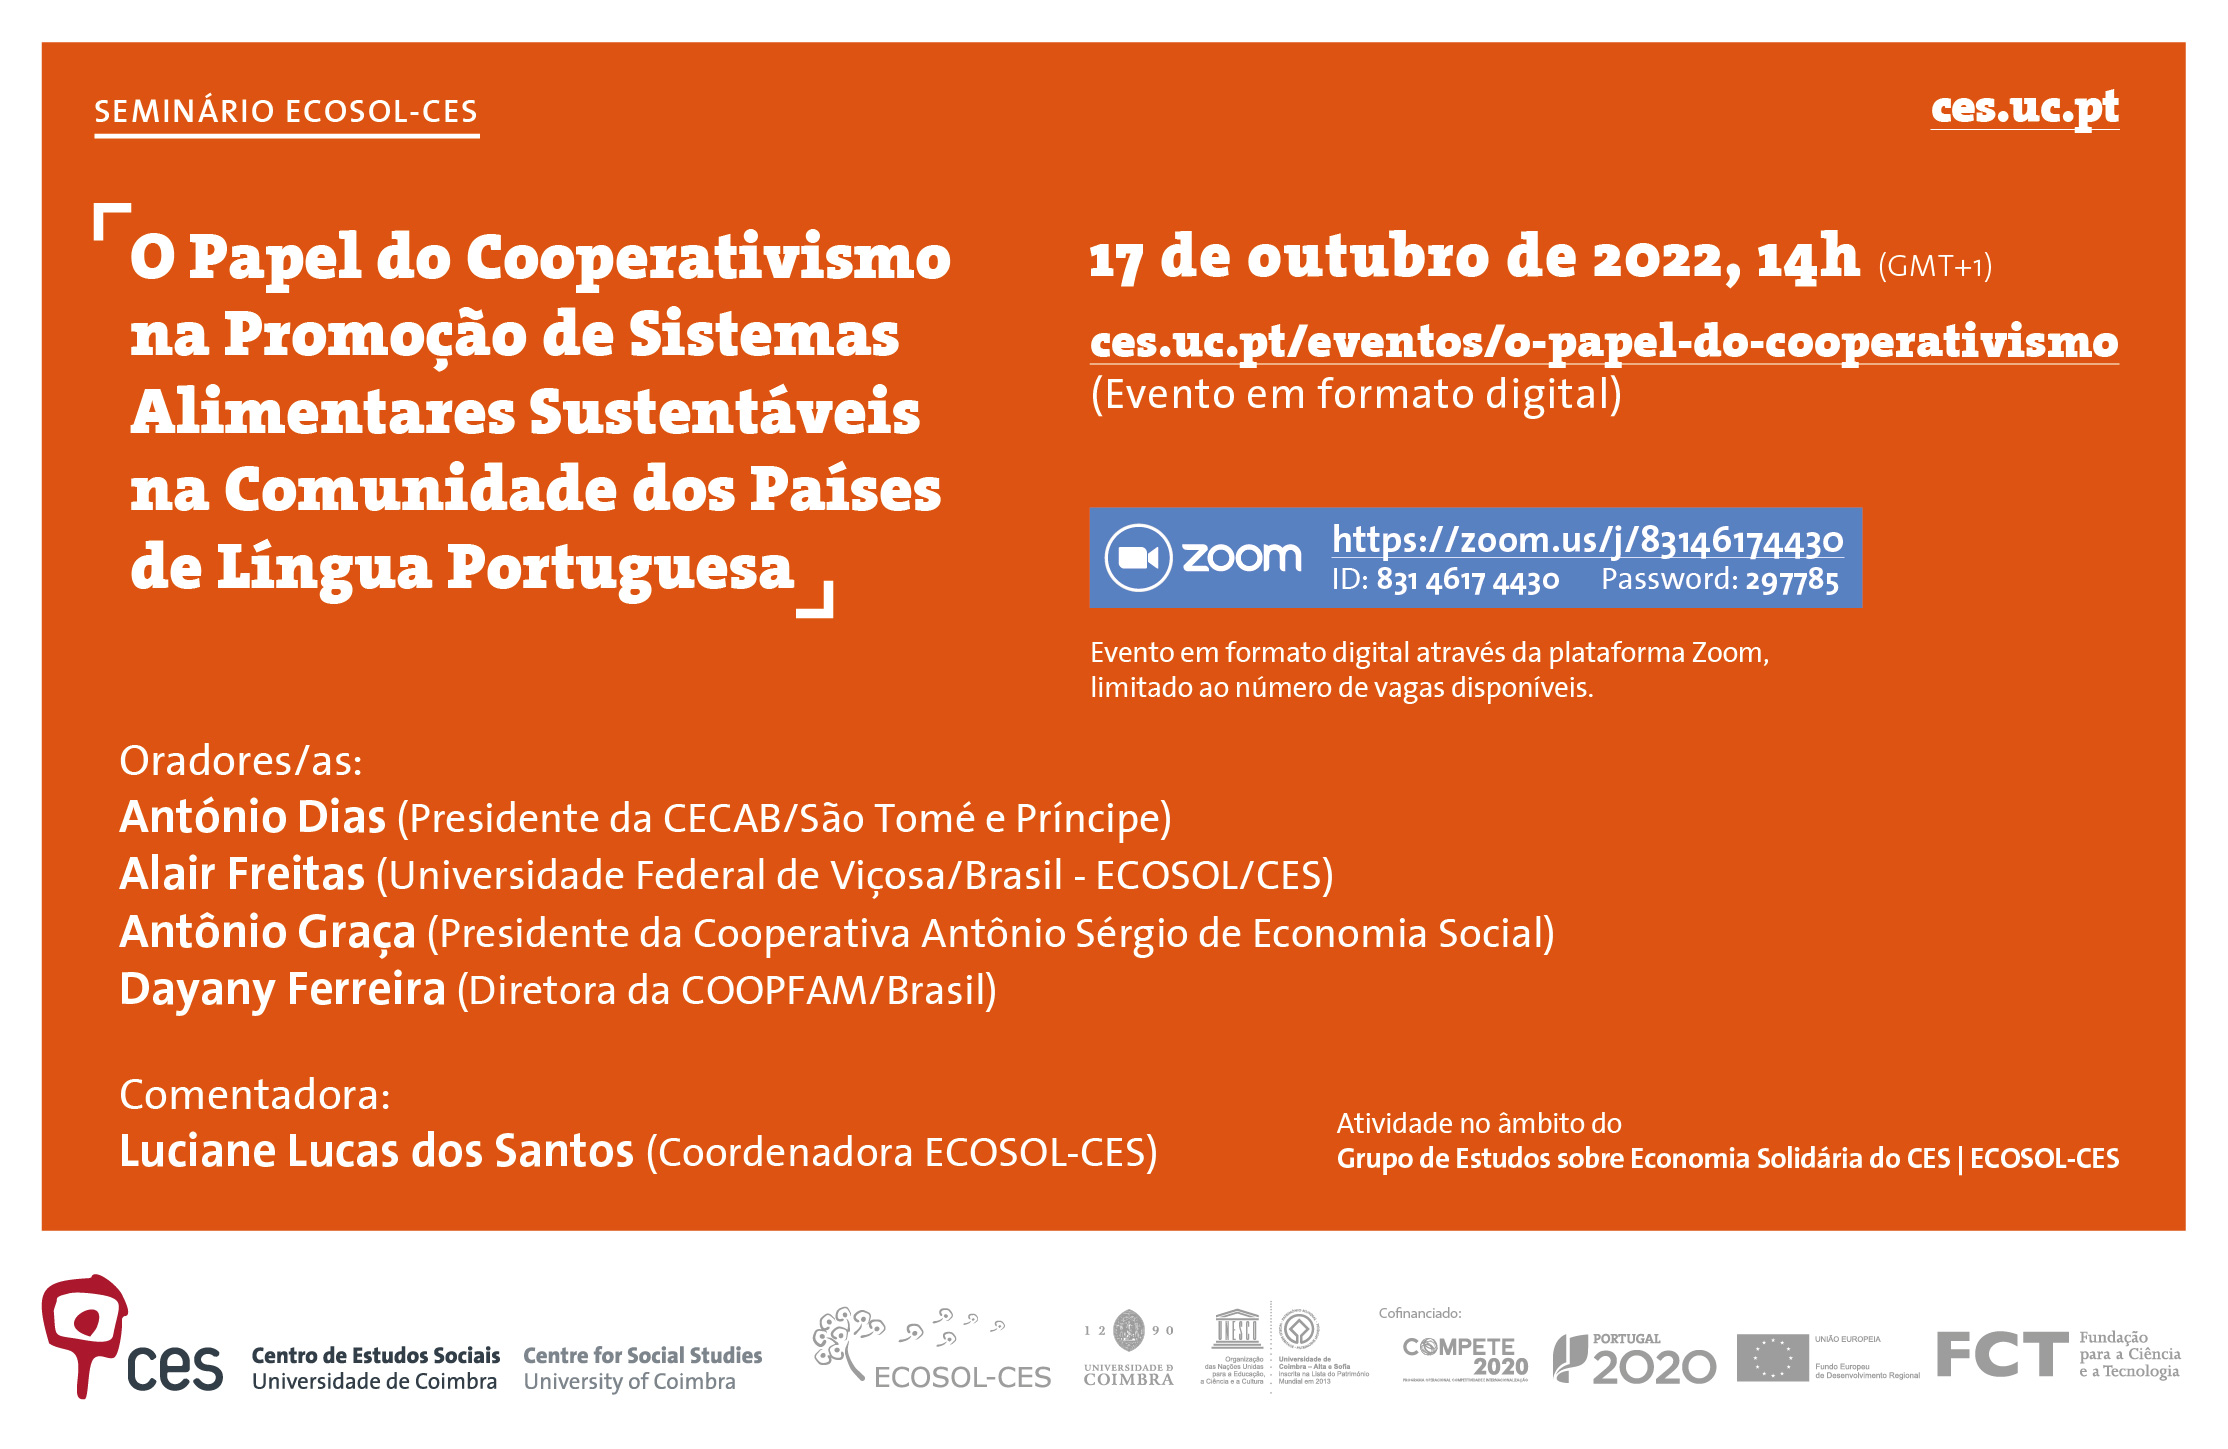 The Role of Cooperativism in Promoting Sustainable Food Systems in the Community of Portuguese Language Countries<span id="edit_40595"><script>$(function() { $('#edit_40595').load( "/myces/user/editobj.php?tipo=evento&id=40595" ); });</script></span>